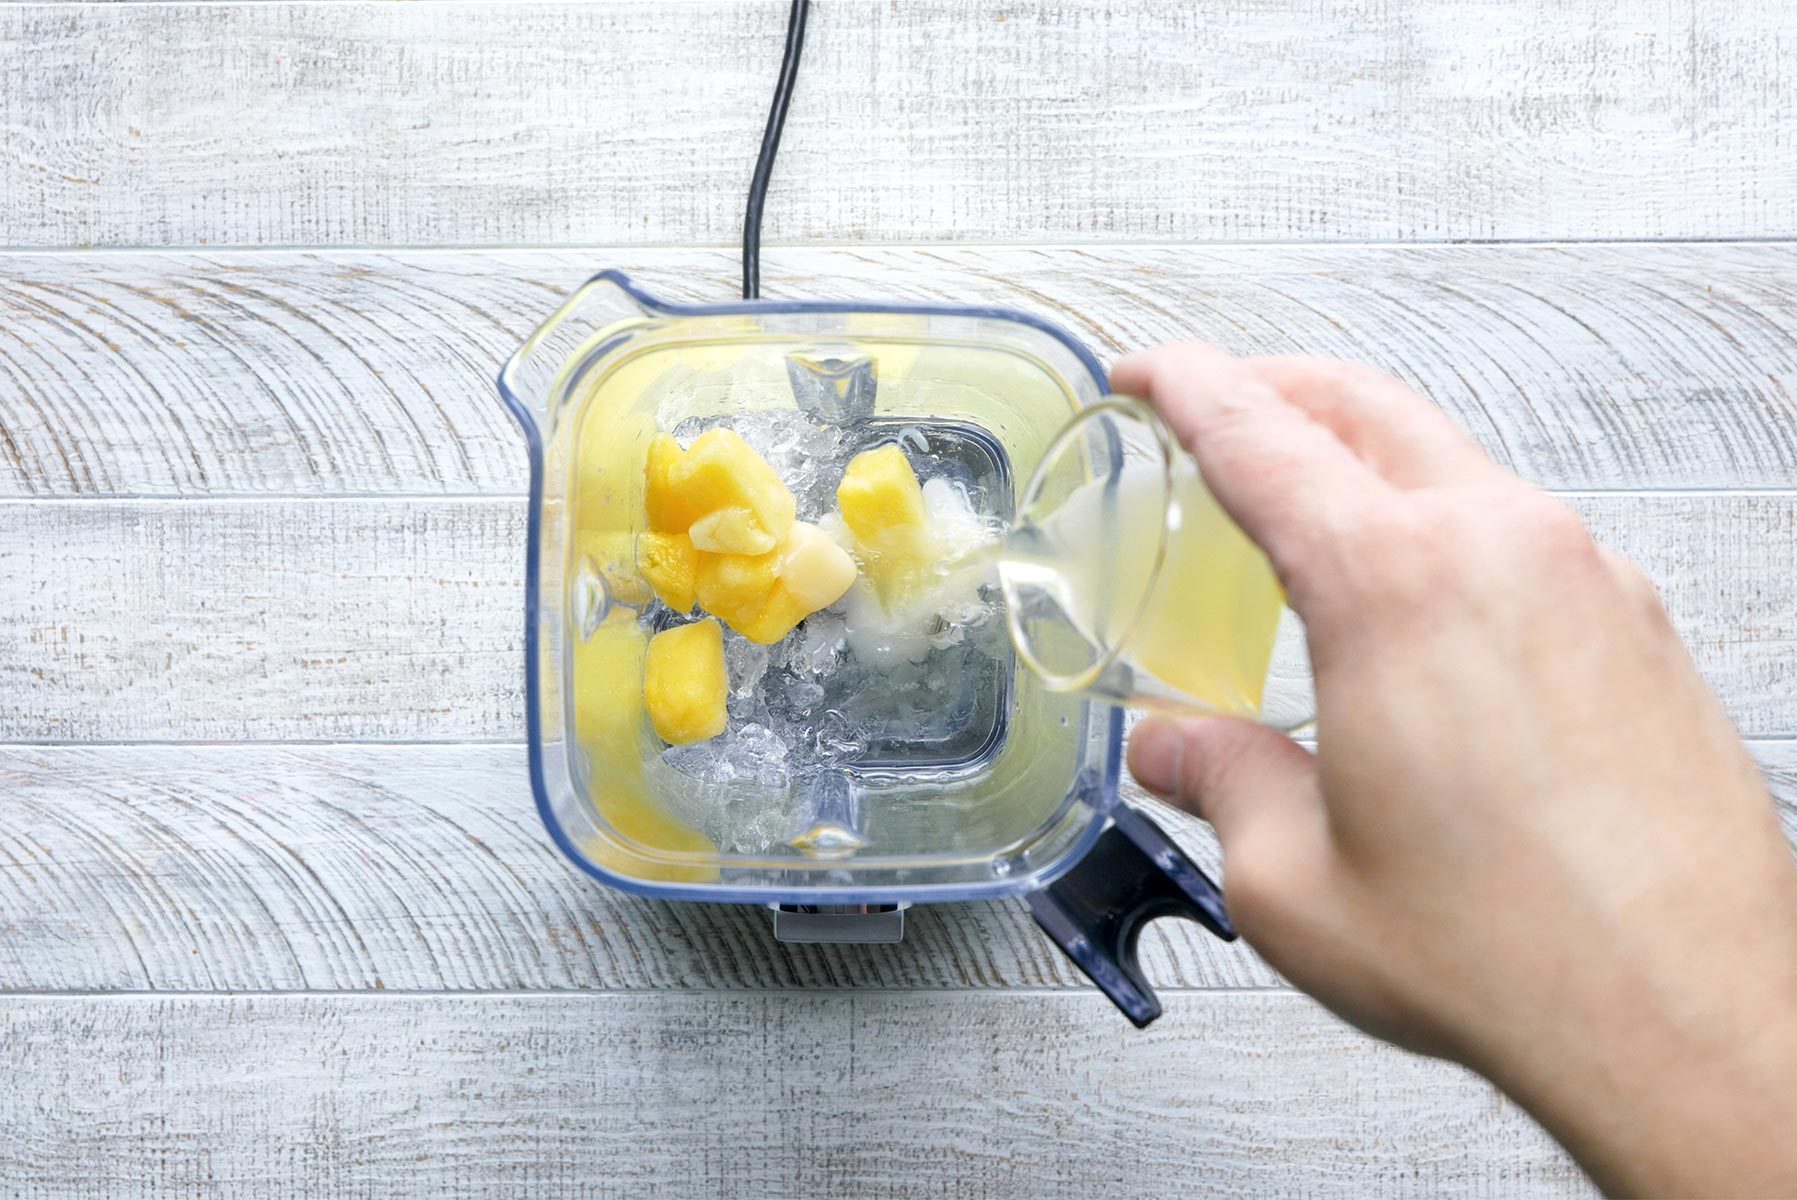 A hand pours a small glass of liquid into a blender containing ice cubes and chunks of mango, all set on a white wooden surface.